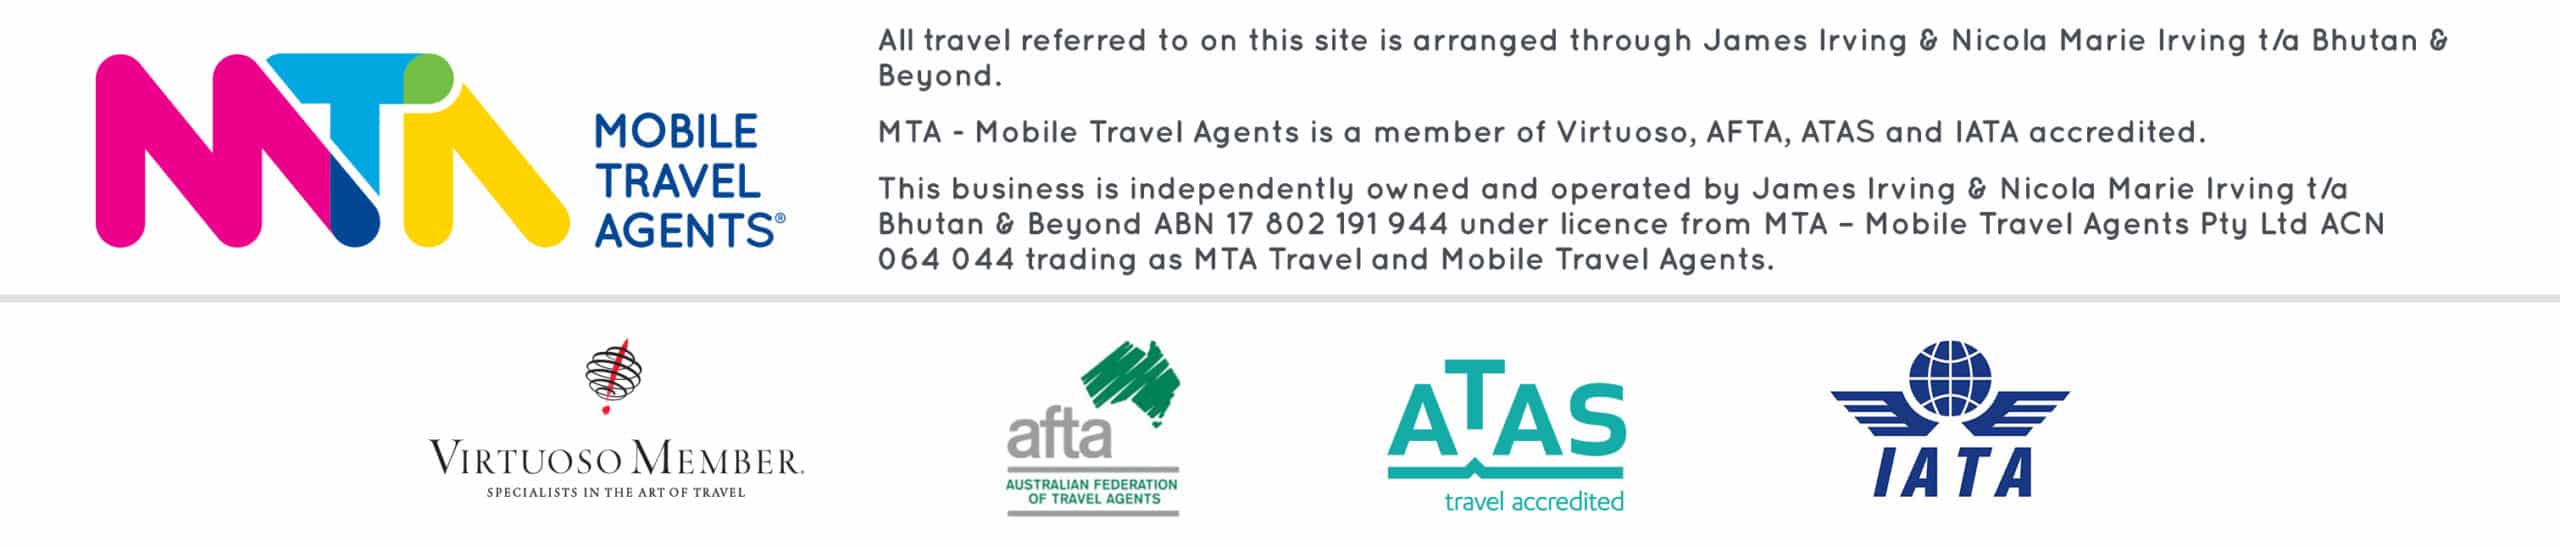 Mobile Travel Agents Terms and Conditions